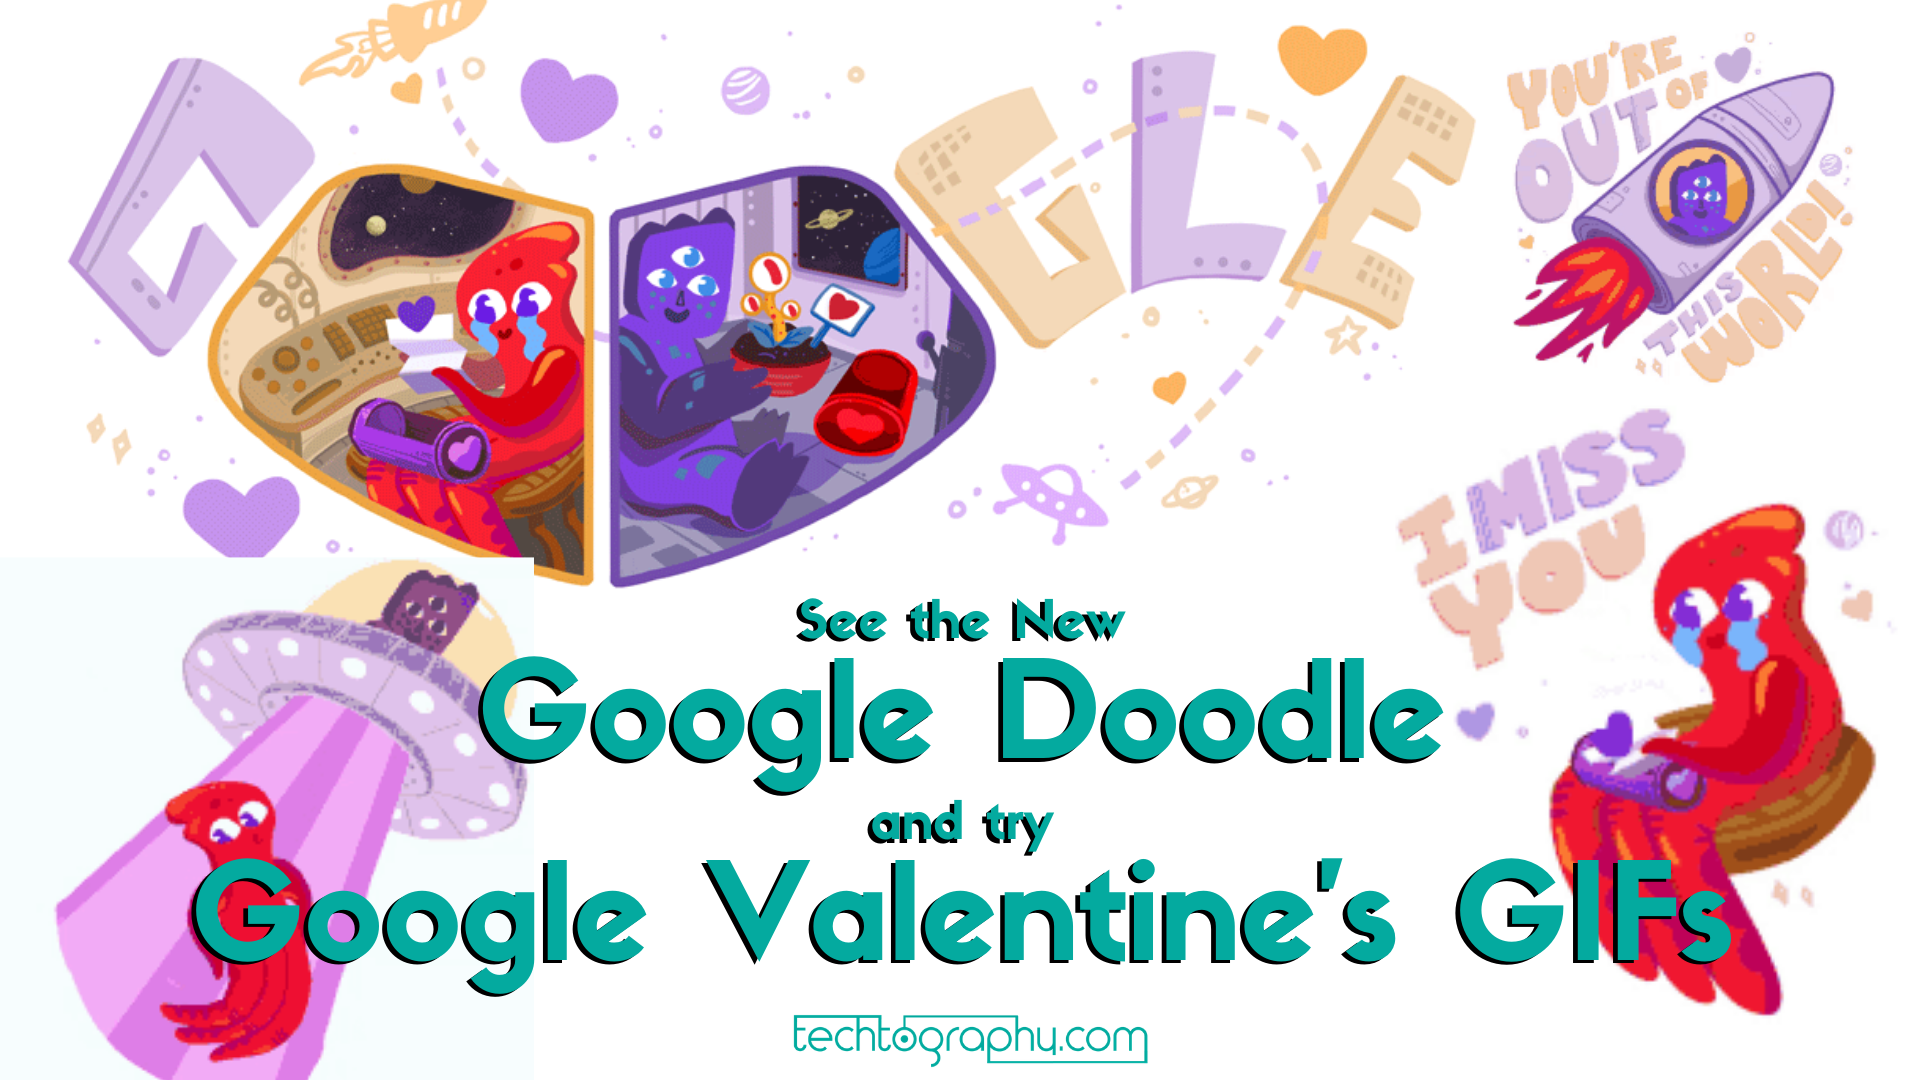 Valentine's Day 2020 Doodle and Google Valentine's GIFs